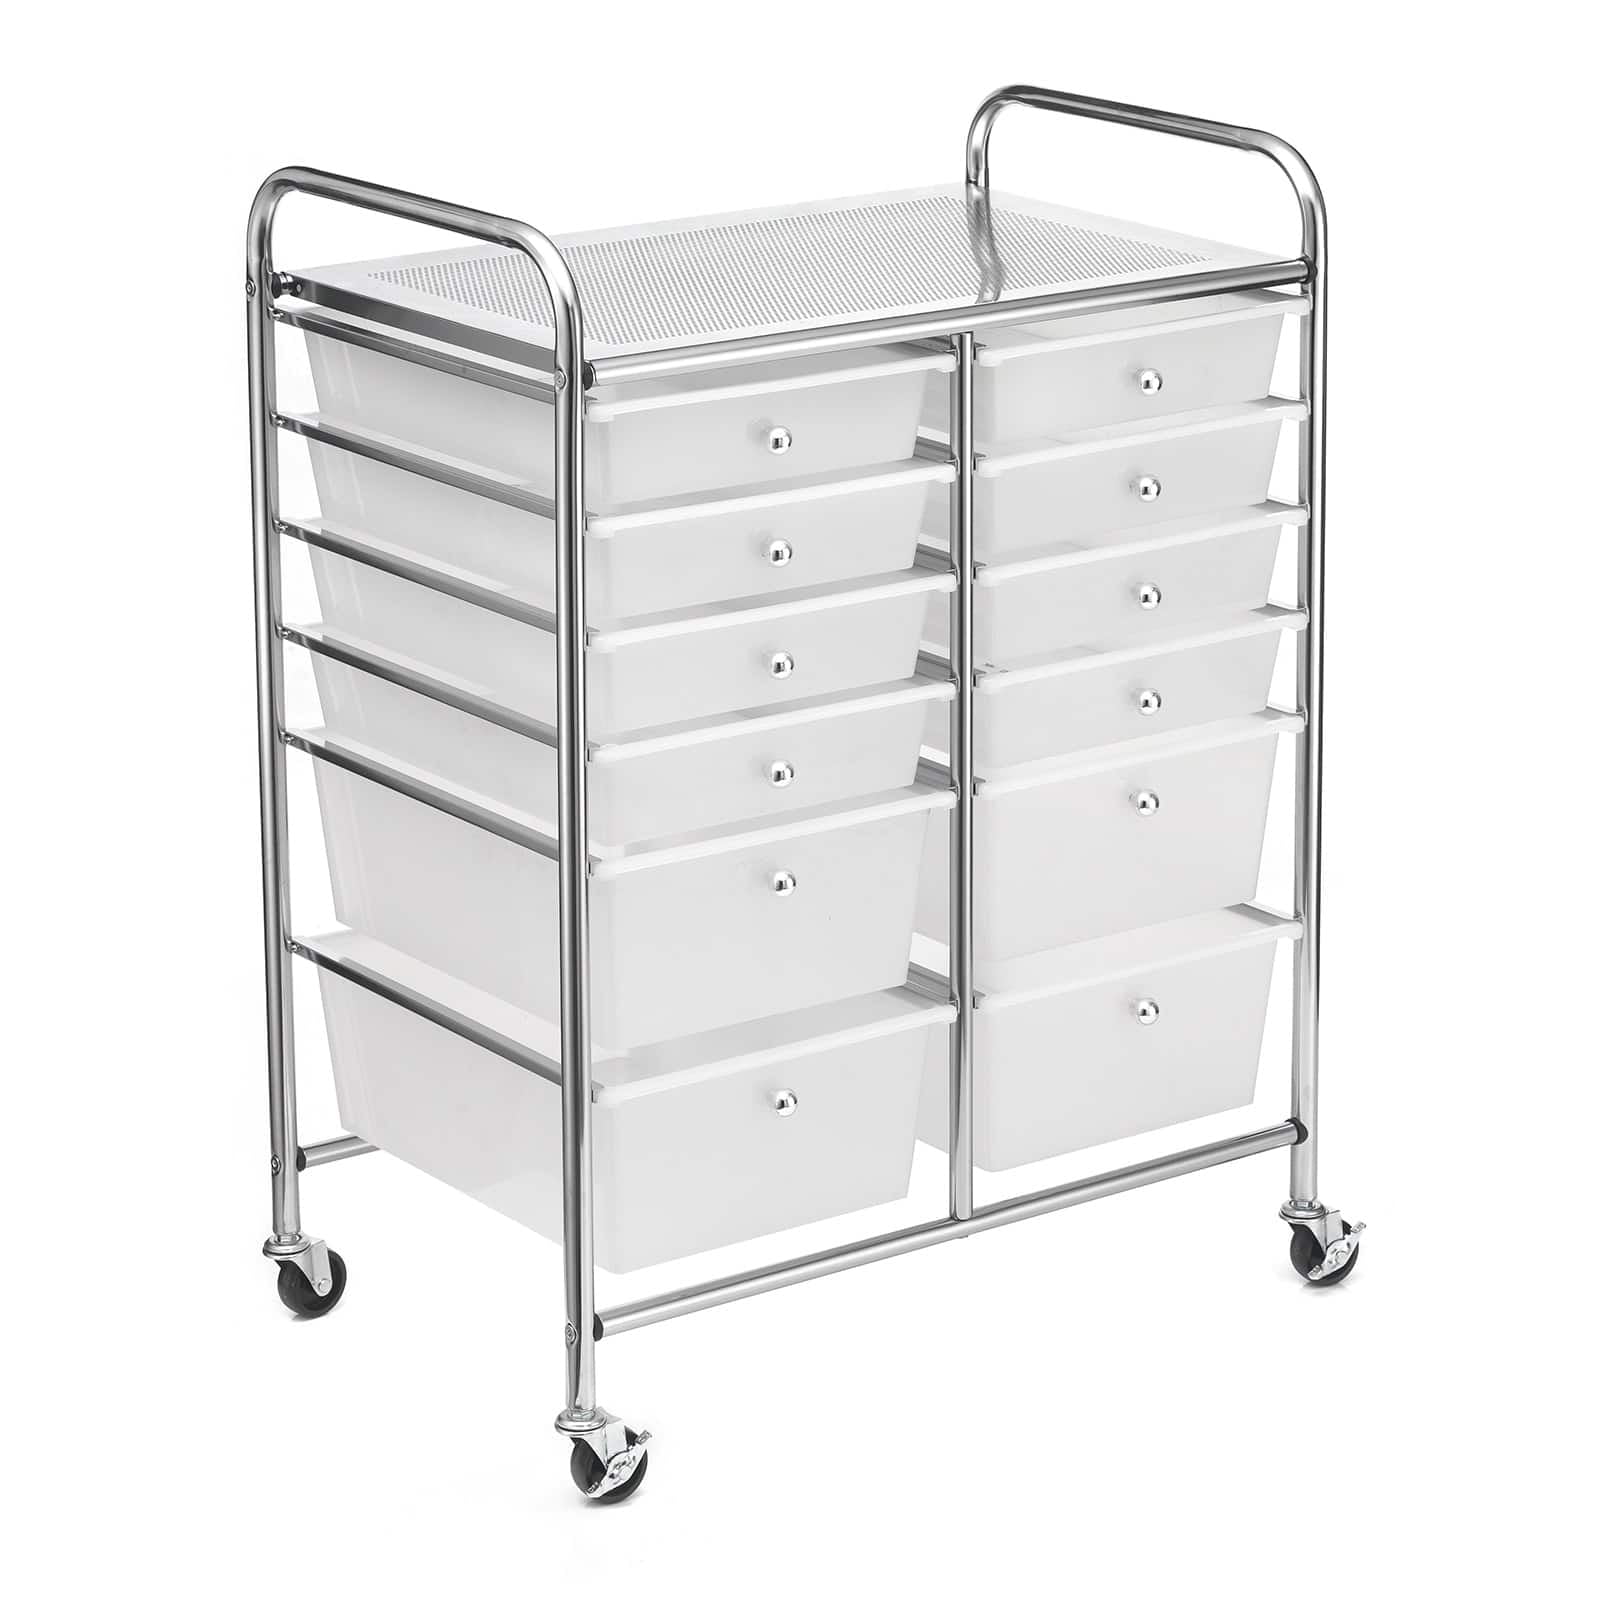 Clear 12 Drawer Rolling Cart by Simply Tidy - Storage Cart for Crafting  Supplies, Home, Office, and School Organization - 1 Pack 